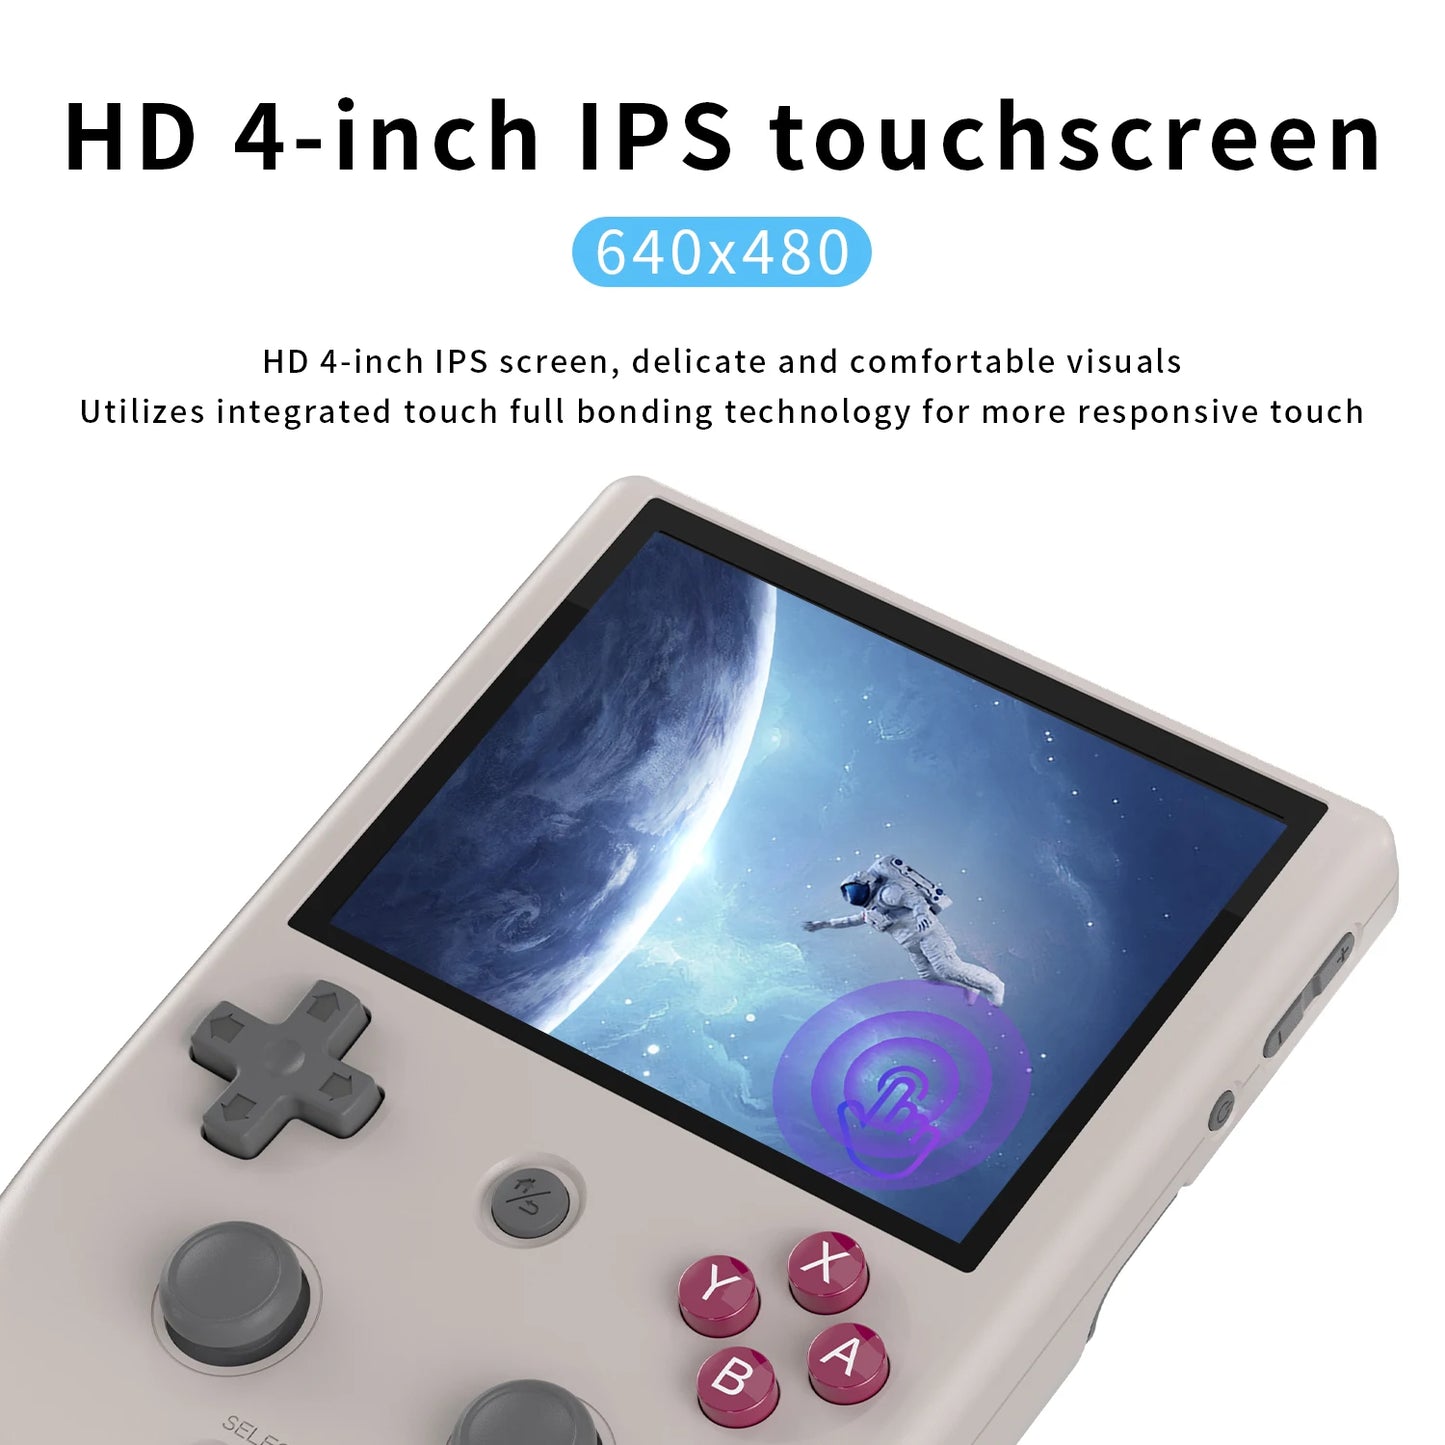 ANBERNIC RG405V Handheld Game Console 4’’ IPS Touch Screen Android 12 Unisoc Tiger T618 64-bit Game Player 5500mAh OTA Update - S & R Enterprises